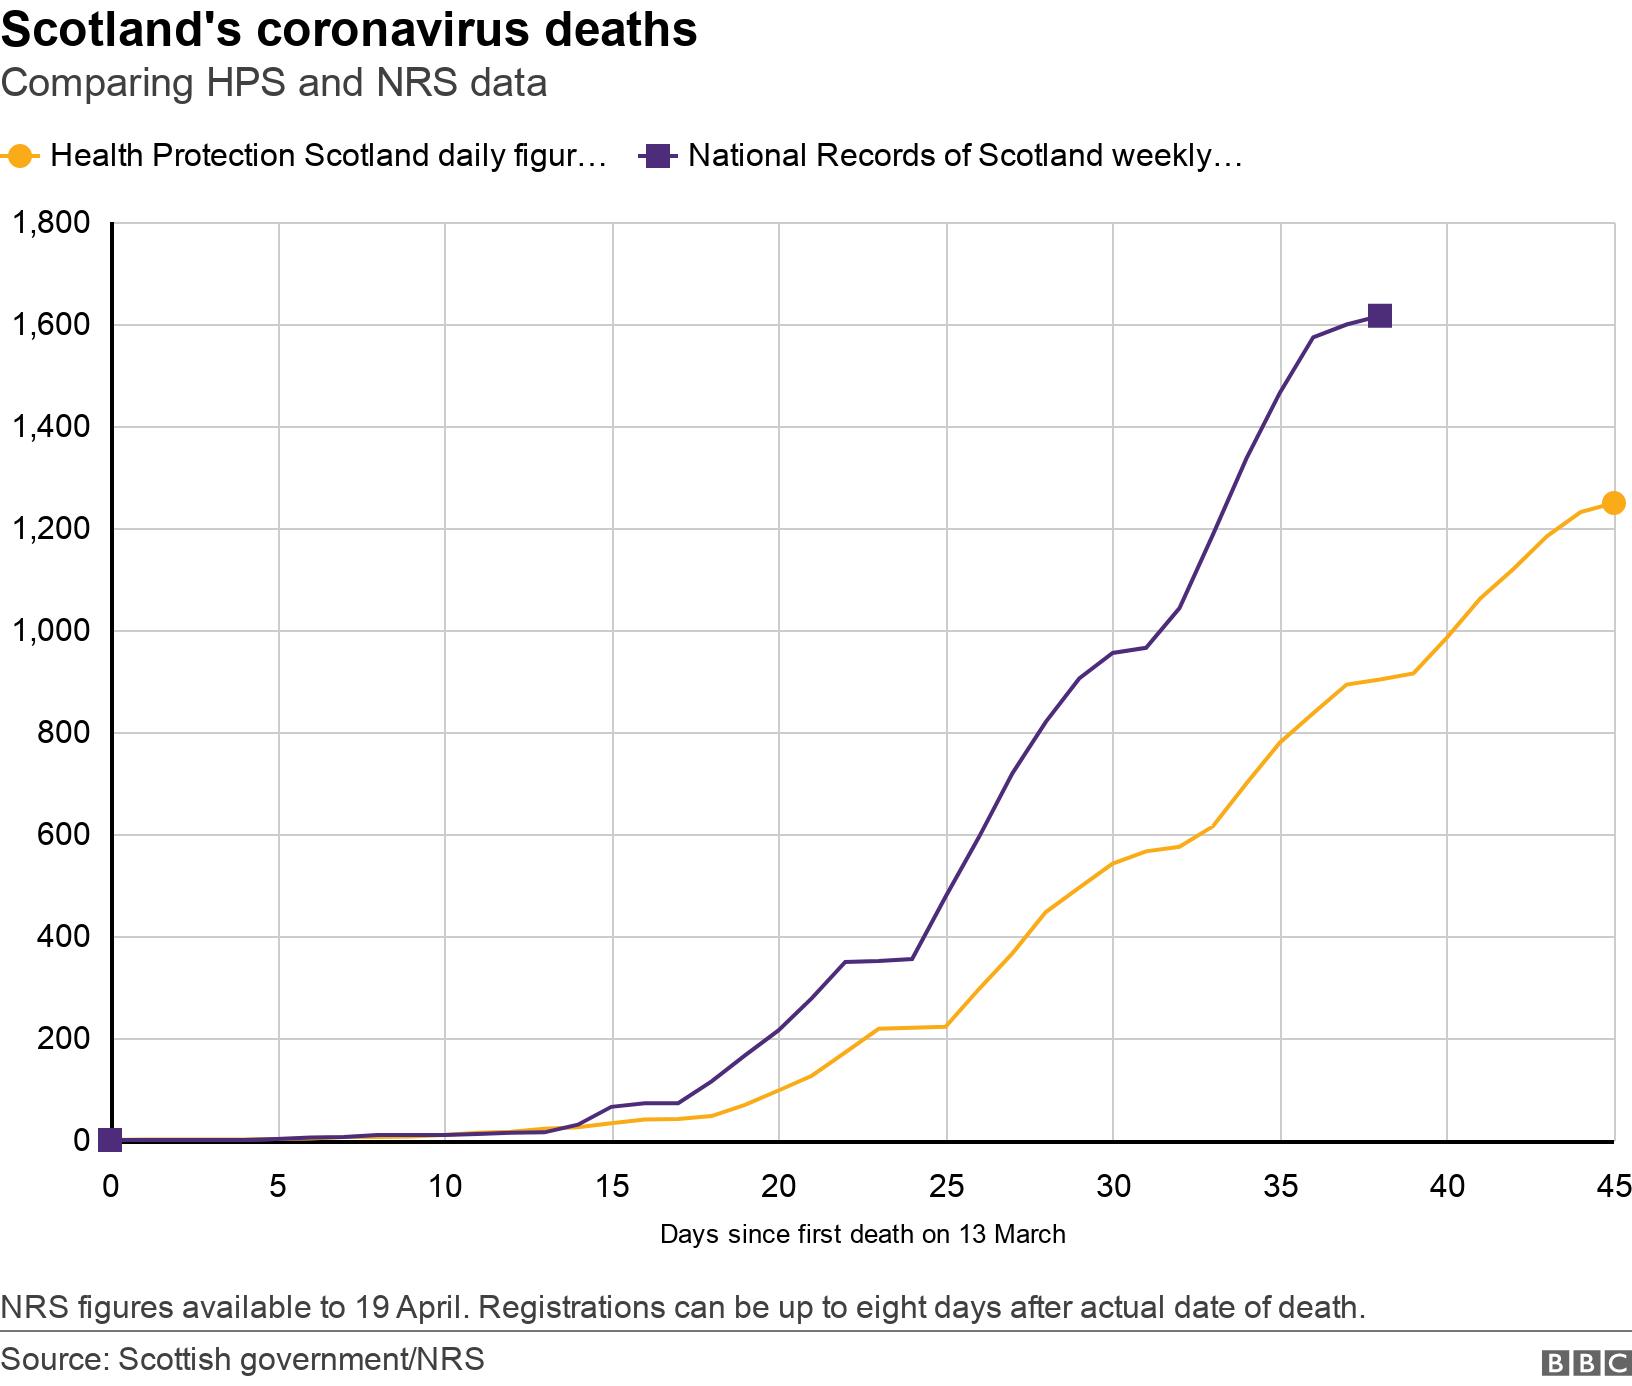 Scotland&#39;s coronavirus deaths. Comparing HPS and NRS data. NRS figures available to 19 April. Registrations can be up to eight days after actual date of death..